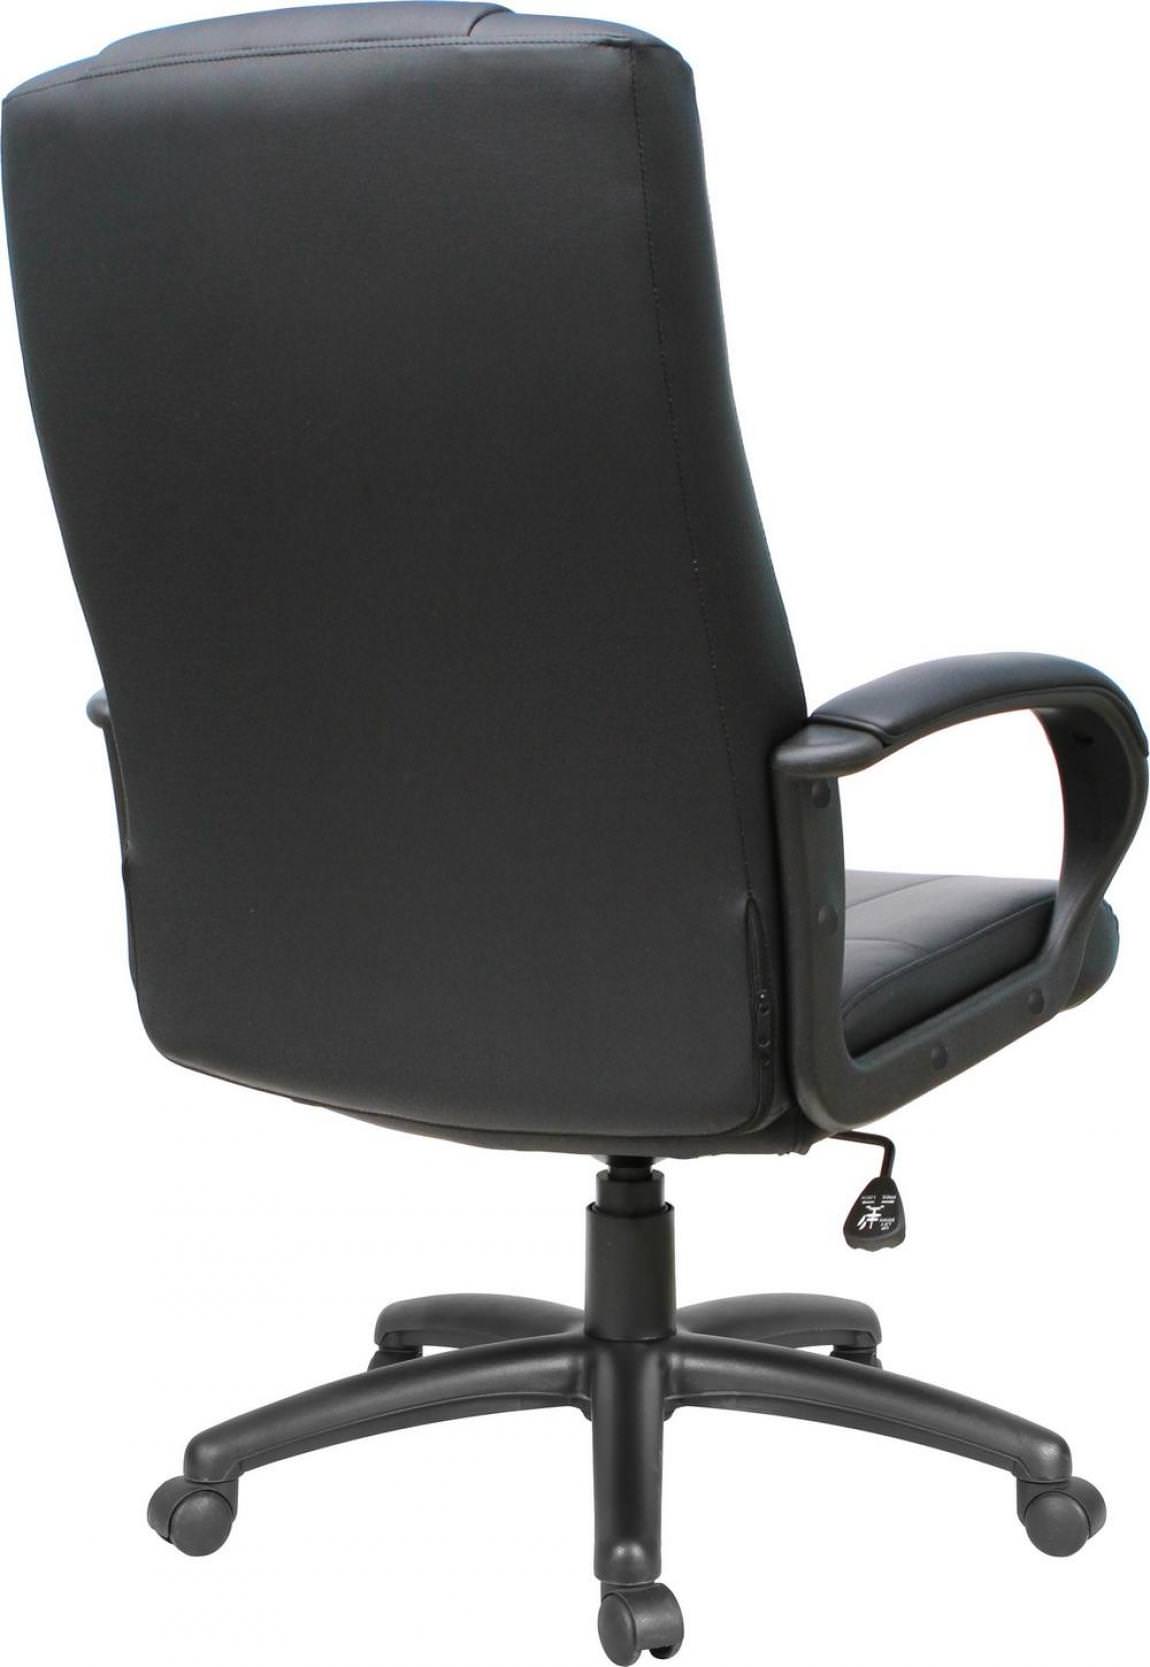 High-Back Black Management Chair with Upholstered Arm Caps